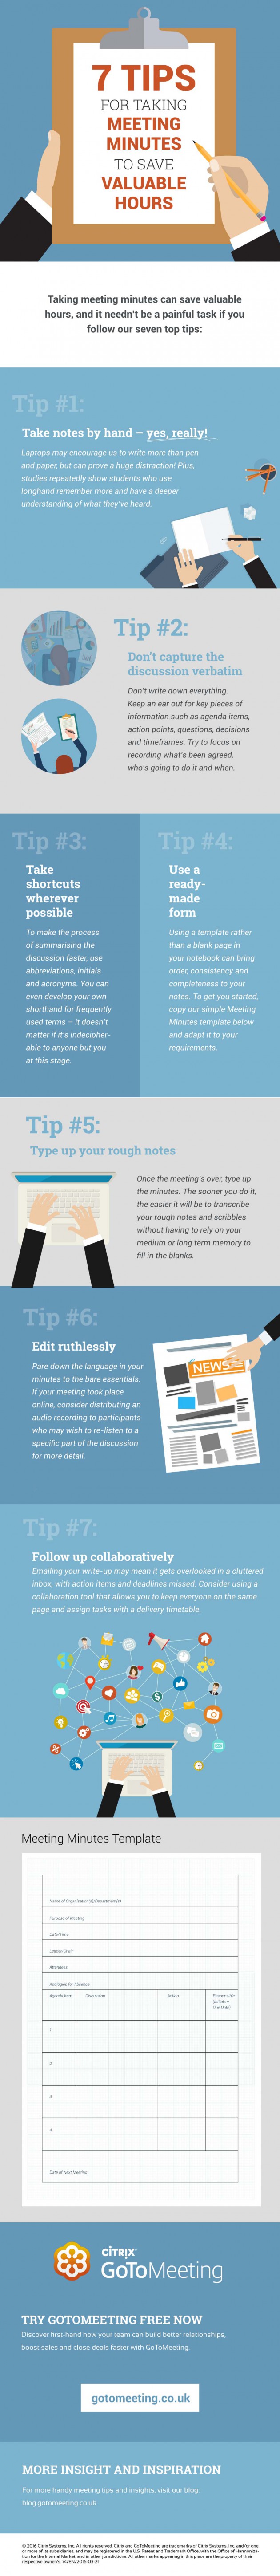 infographic-how-to-take-effective-meeting-minutes-630x5806